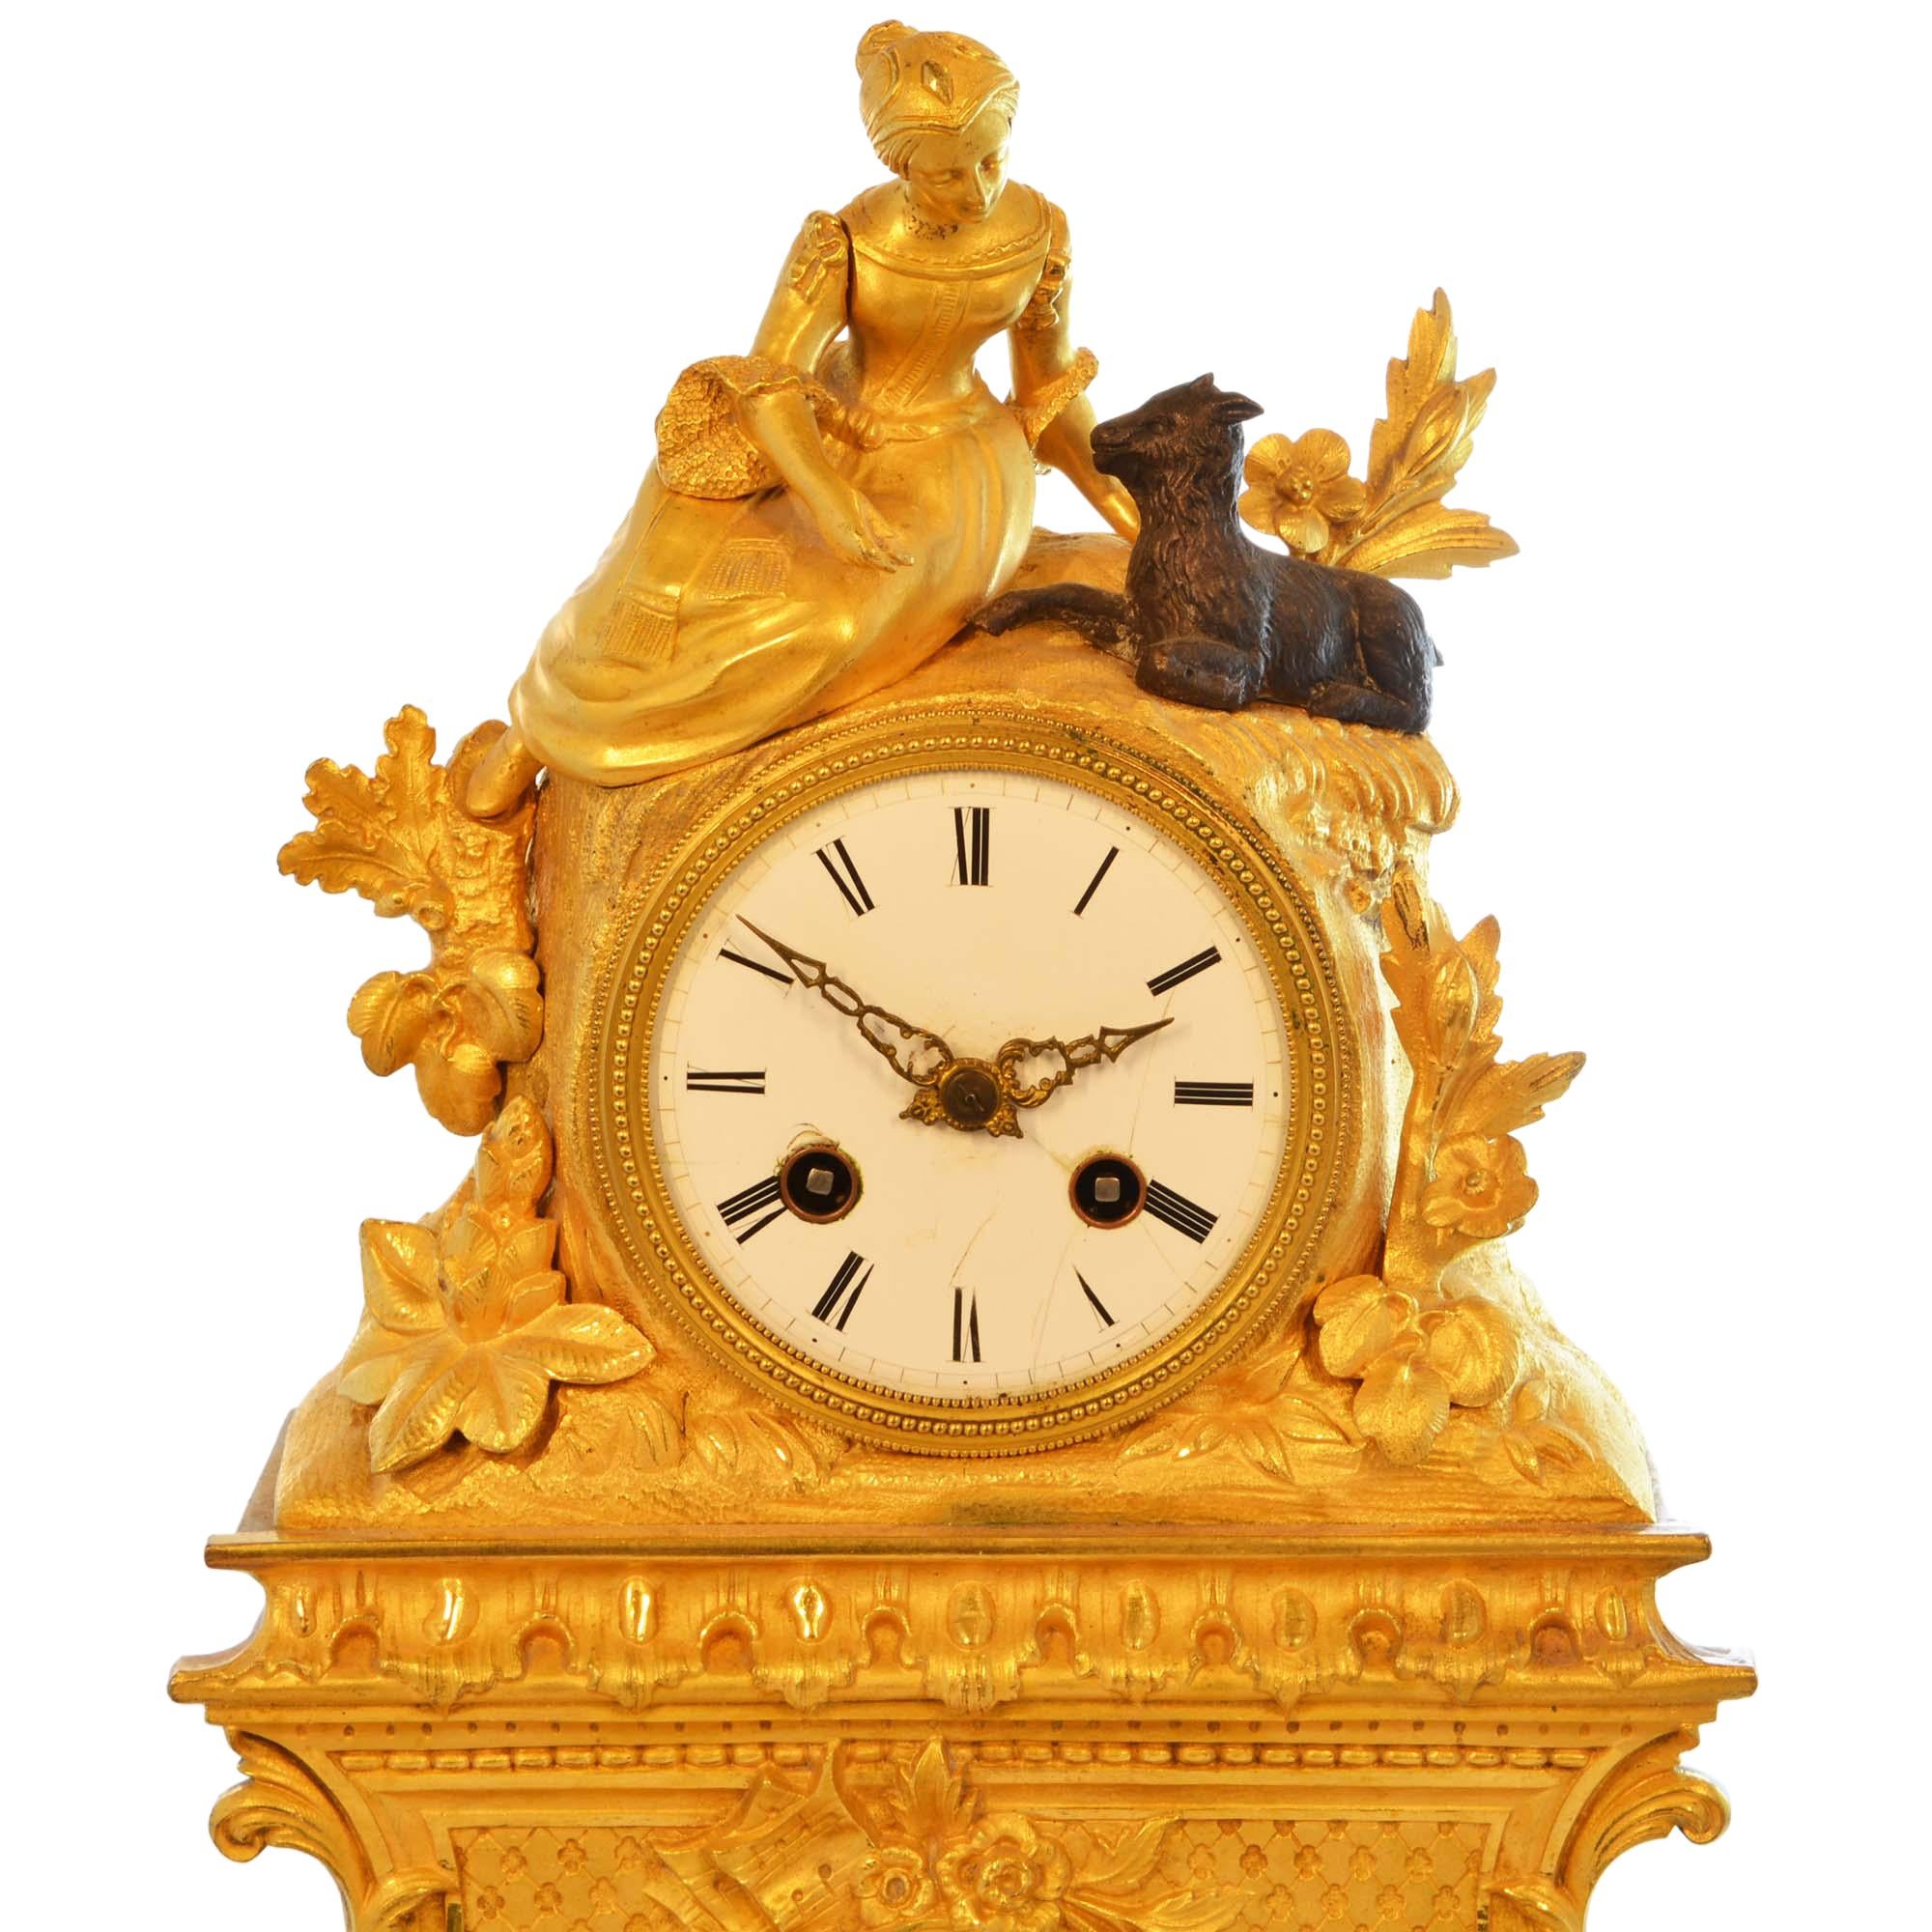 We found this lovely clock in a shop just outside of Paris that is known for having the best finds from Paris estate sales. The little girl and goat are absolutely charming and so unique. The clock comes with its key. The clock works but does not